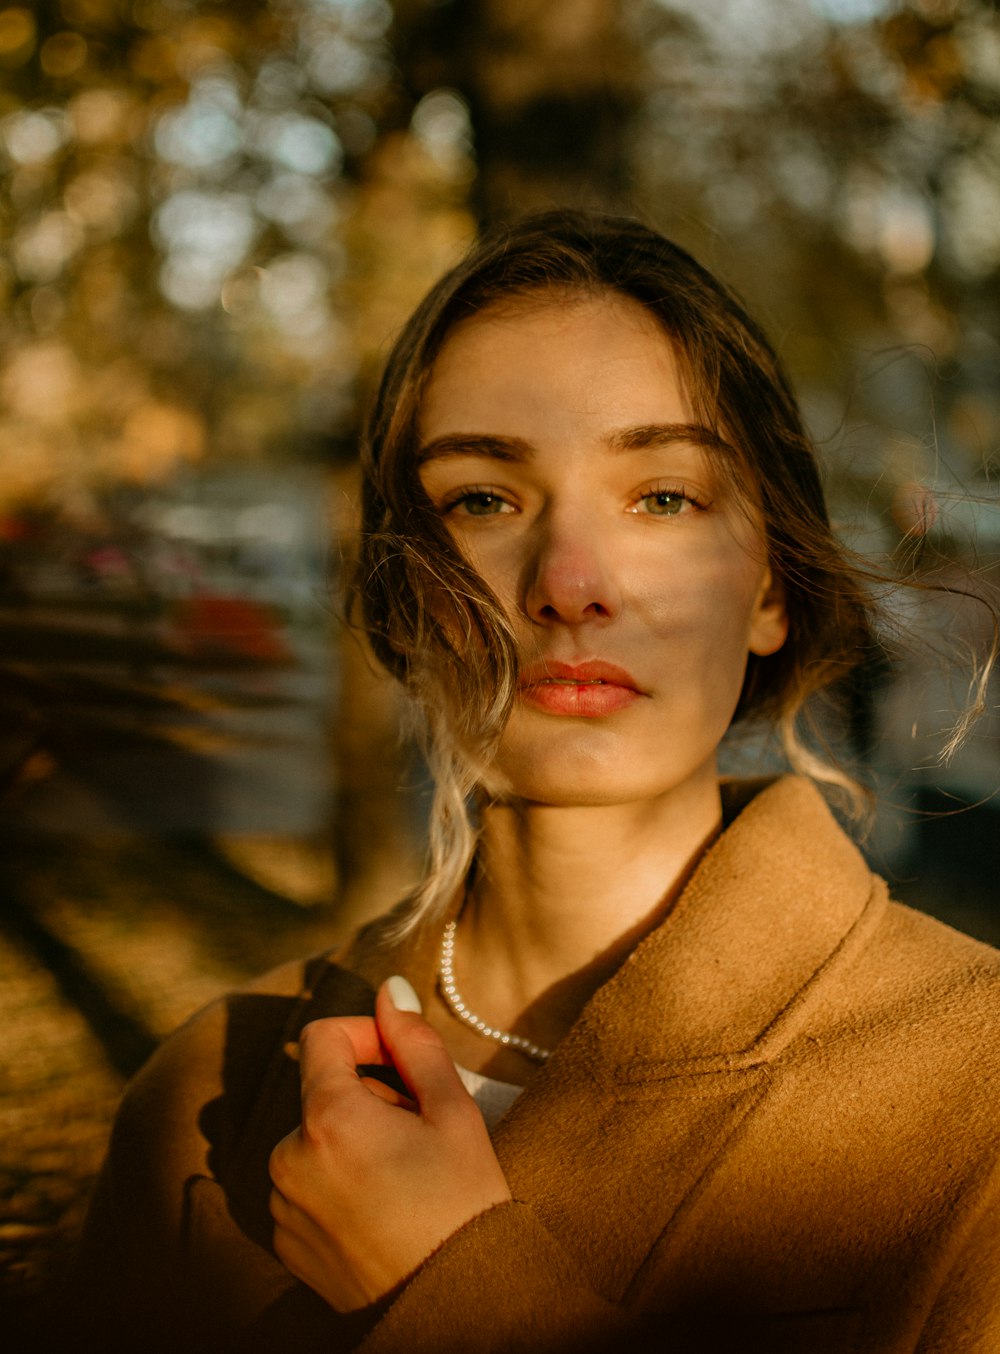 a woman in a brown sweater is holding a cigarette